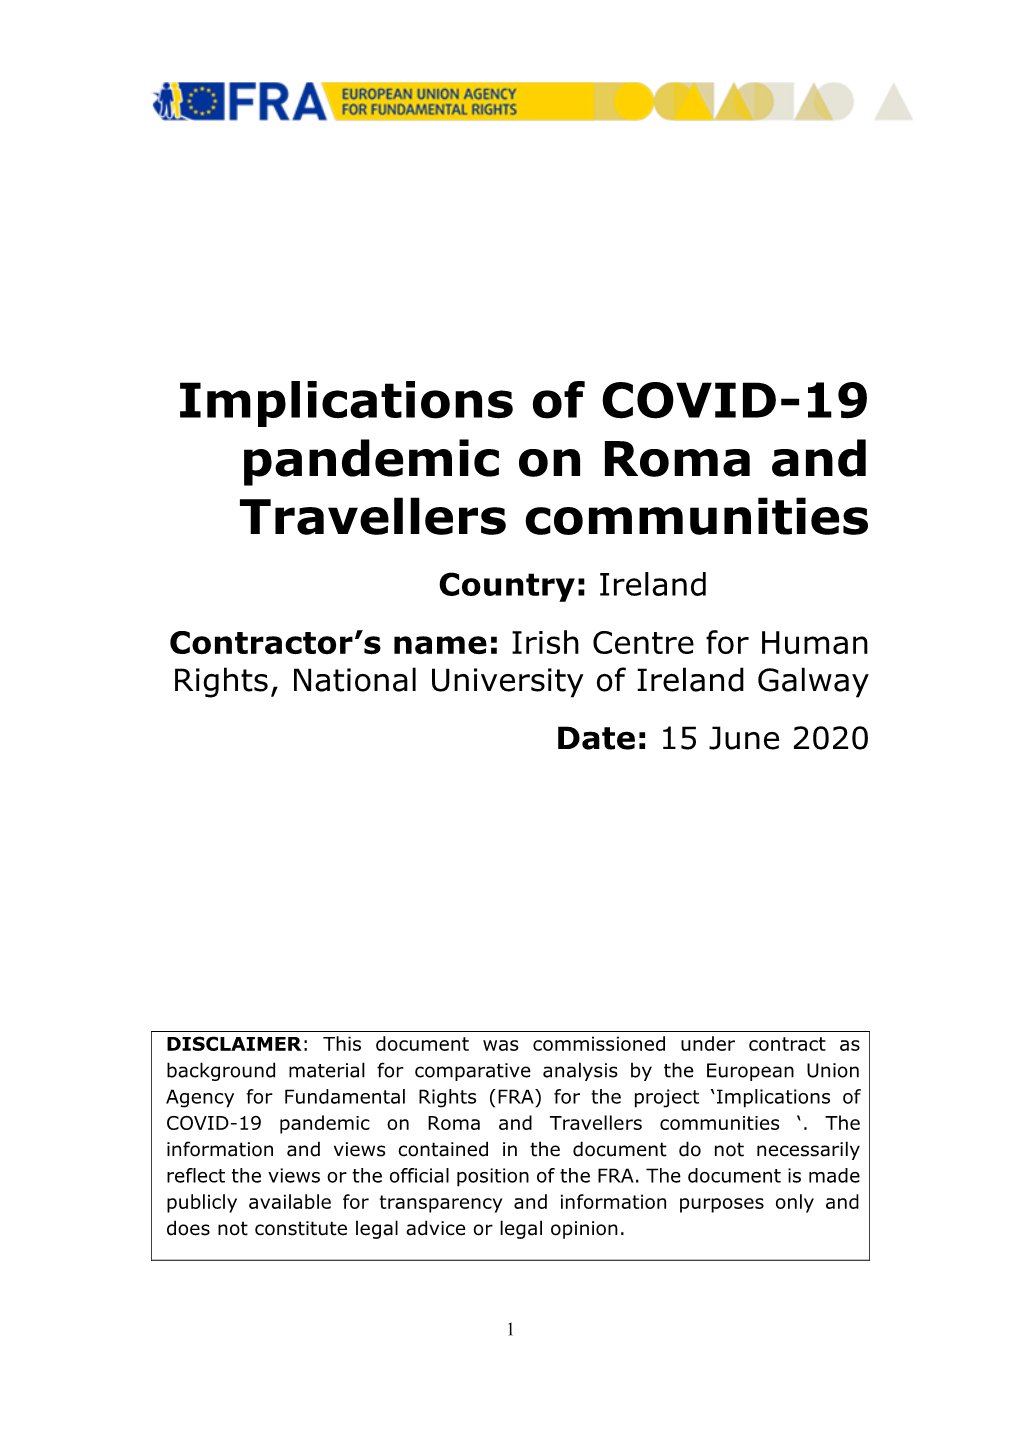 Implications of COVID-19 Pandemic on Roma and Travellers